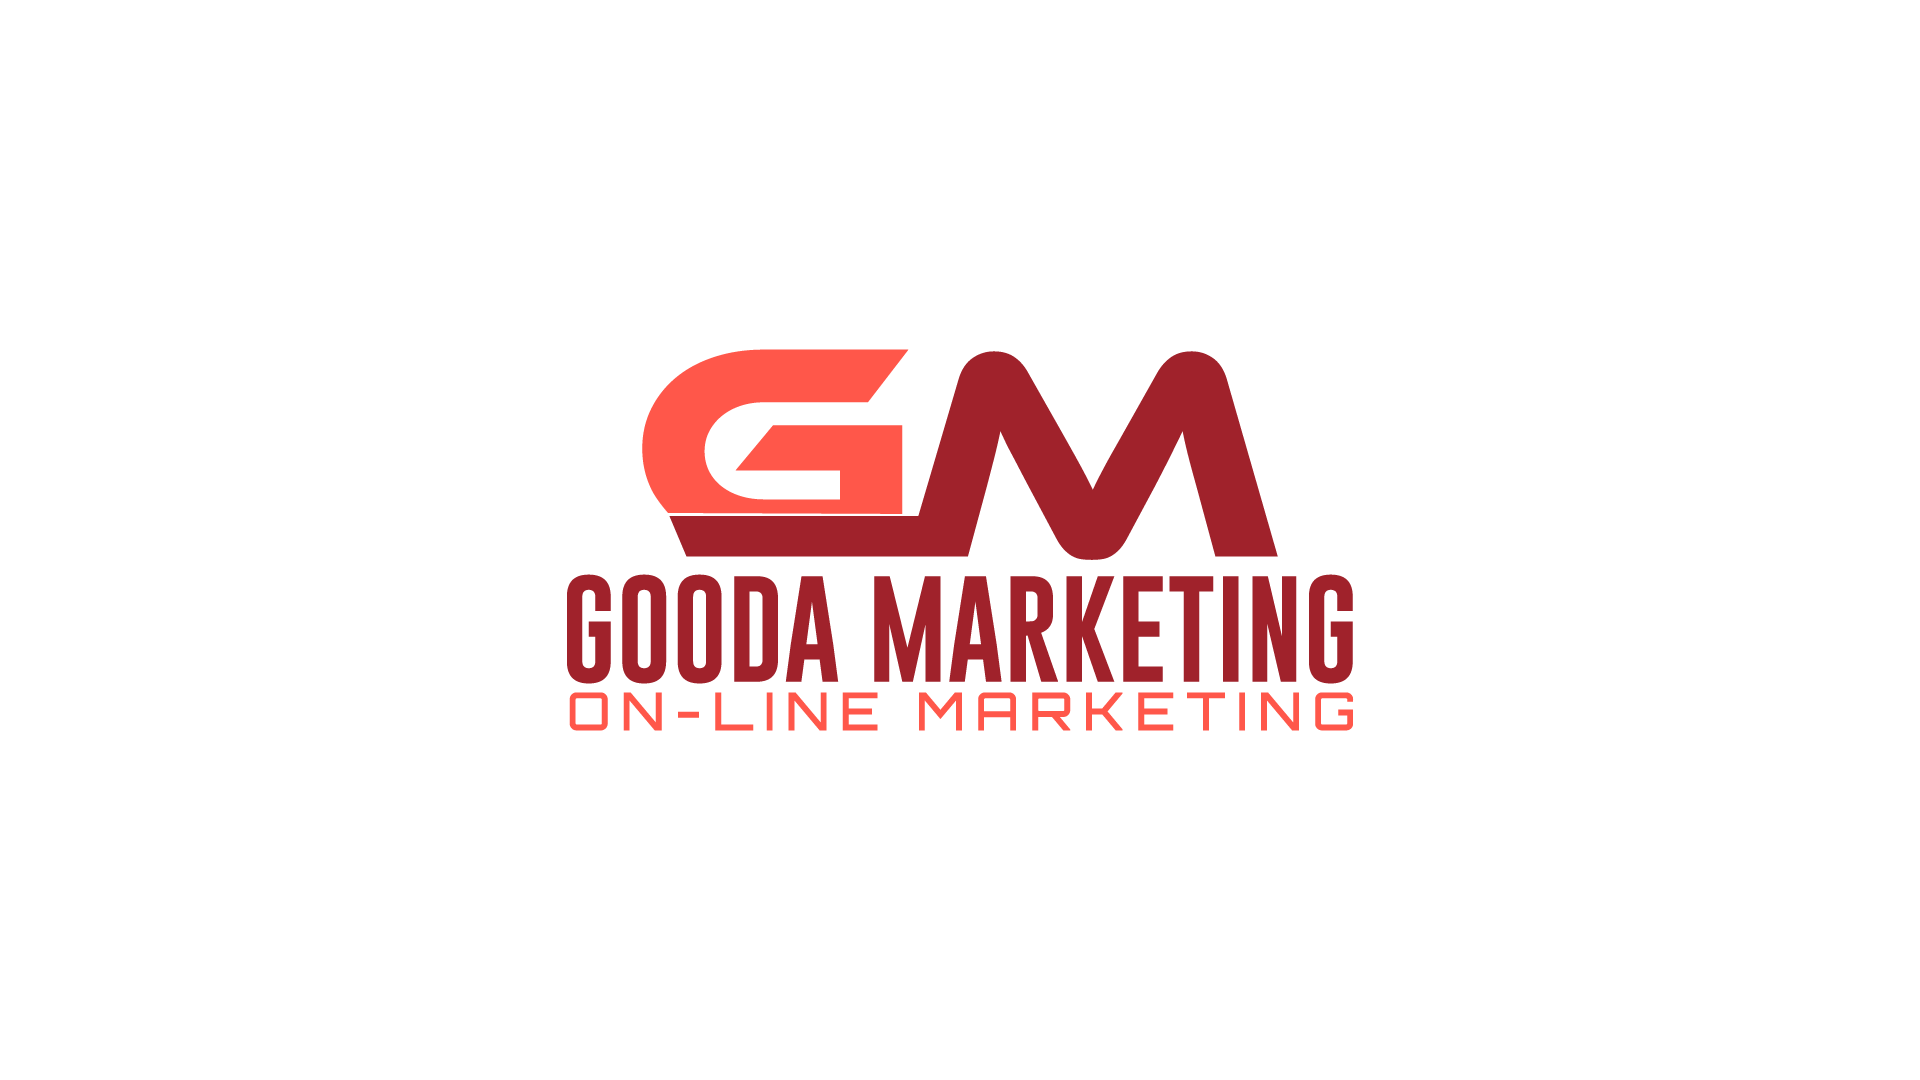 Gooda Marketing from GB of Softwares and Application